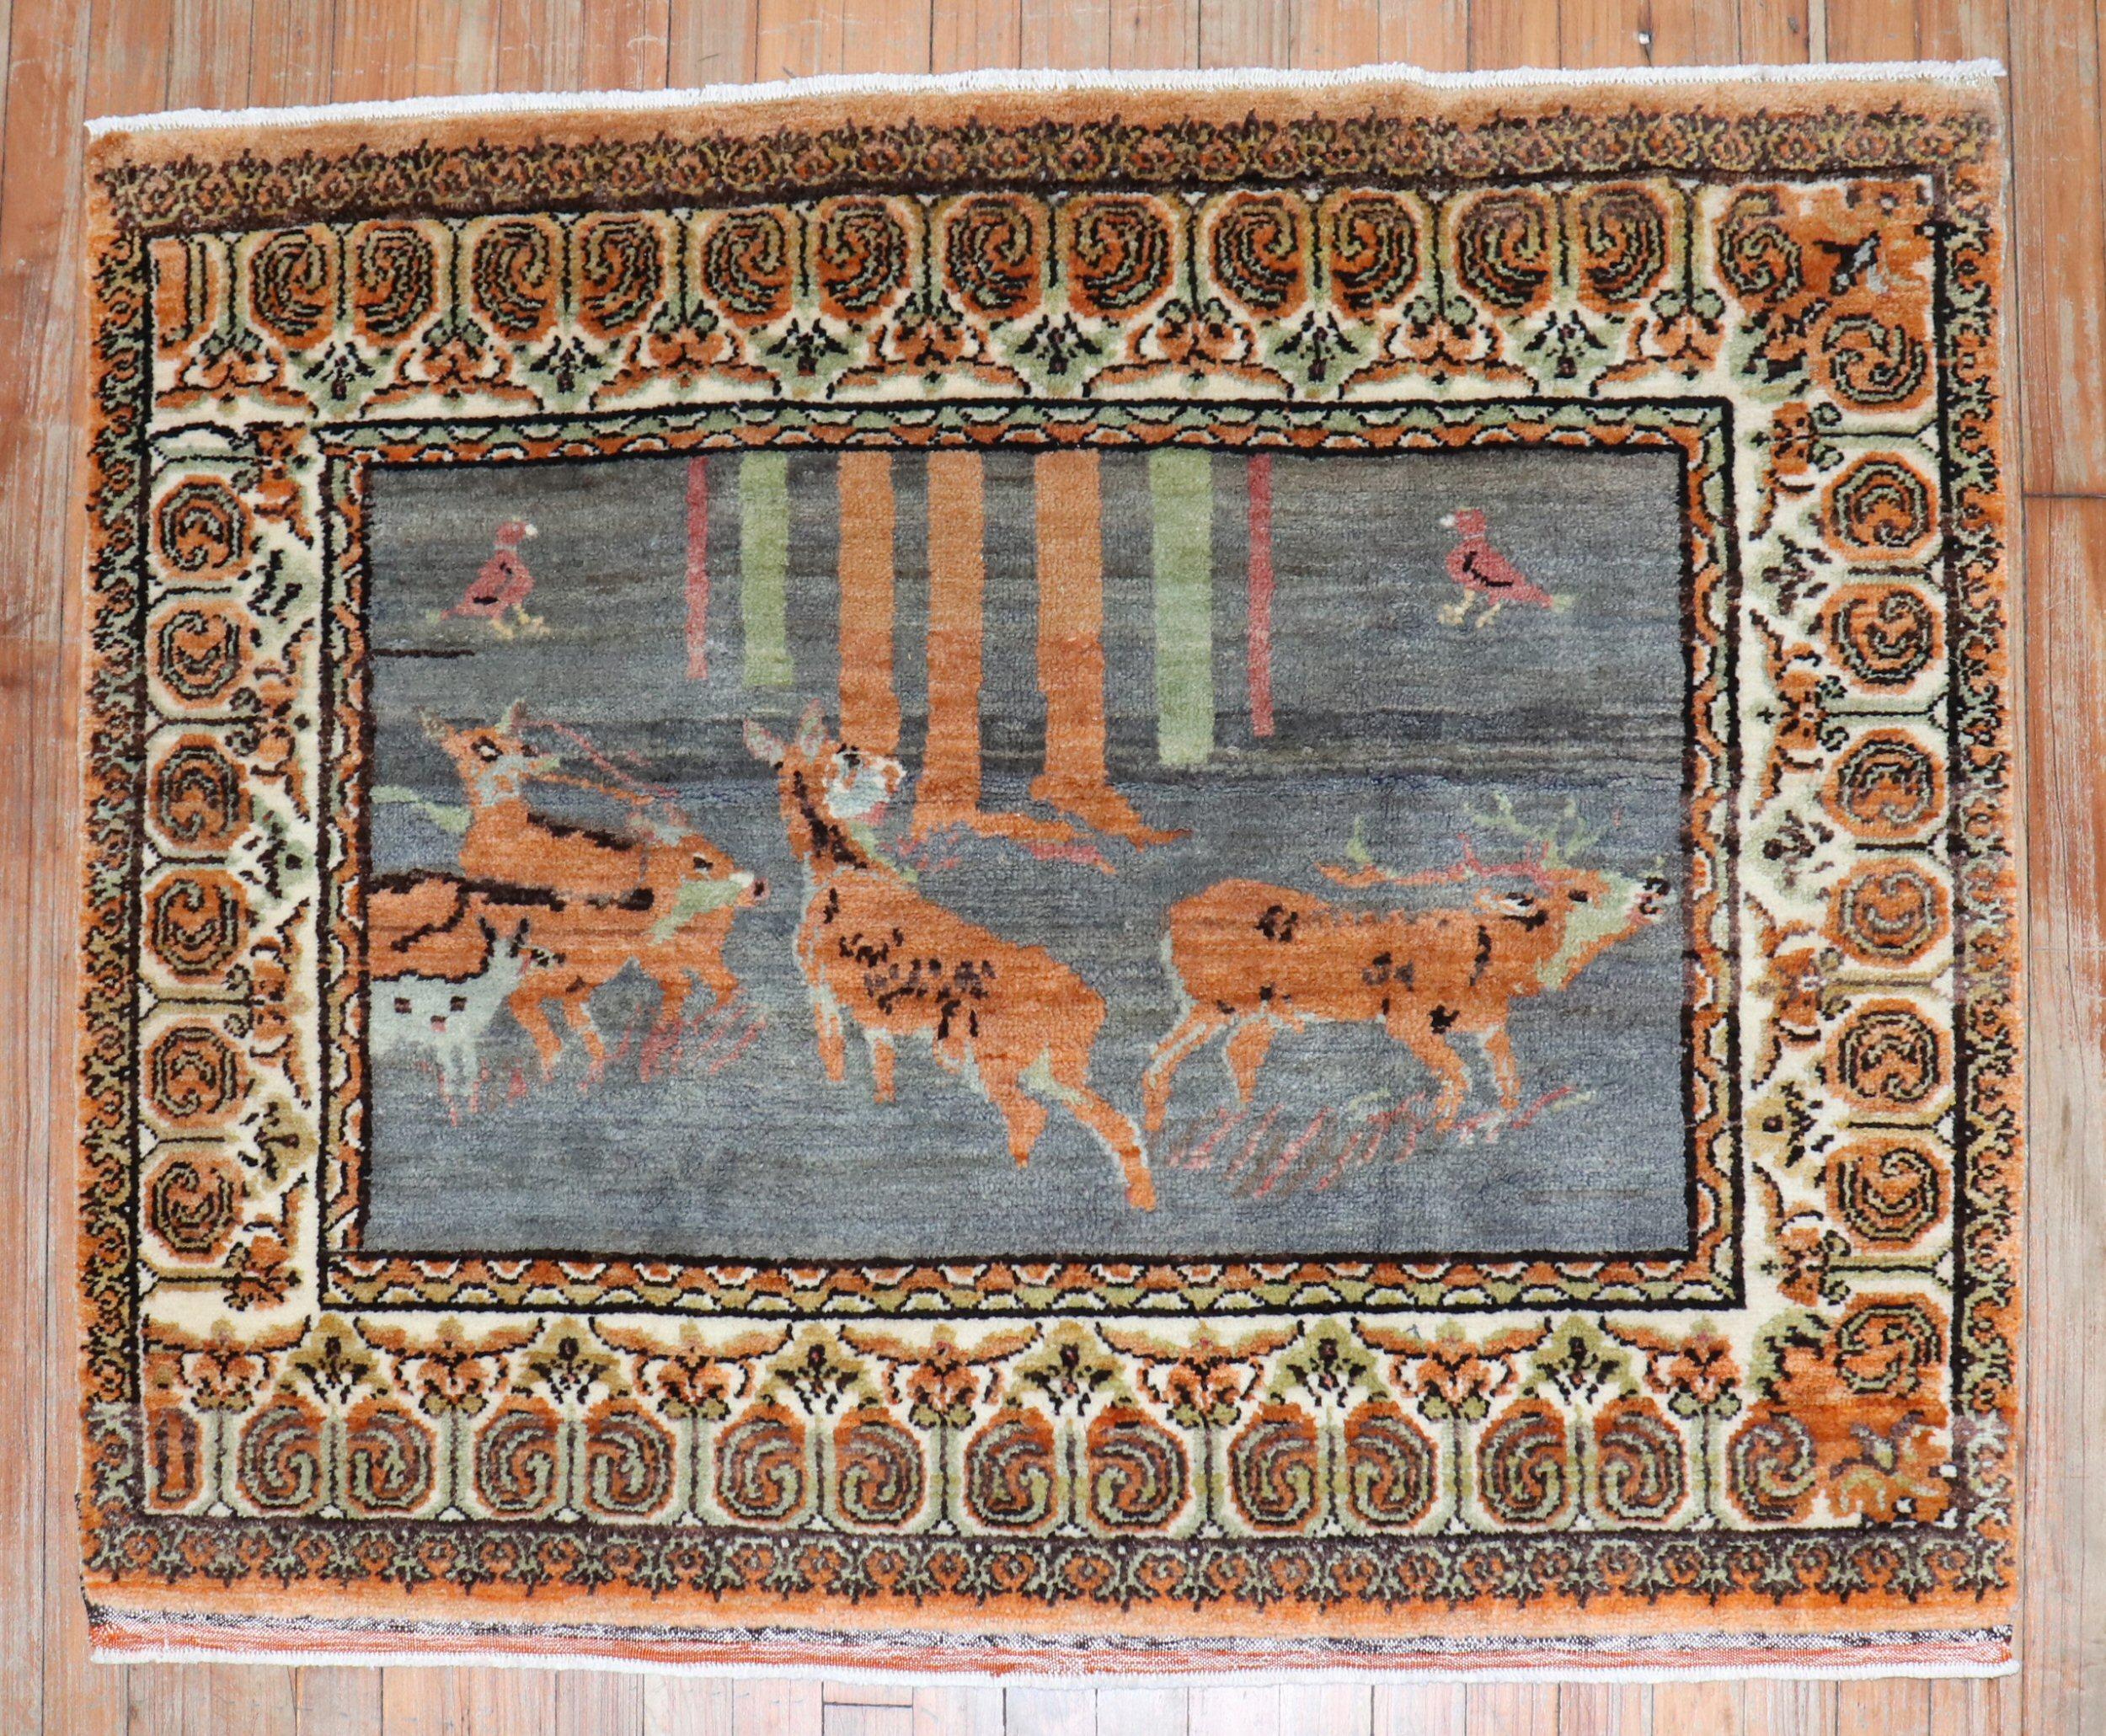 early 20th century one of a kind Turkish pictorial reindeer rug

Measures: 3'3